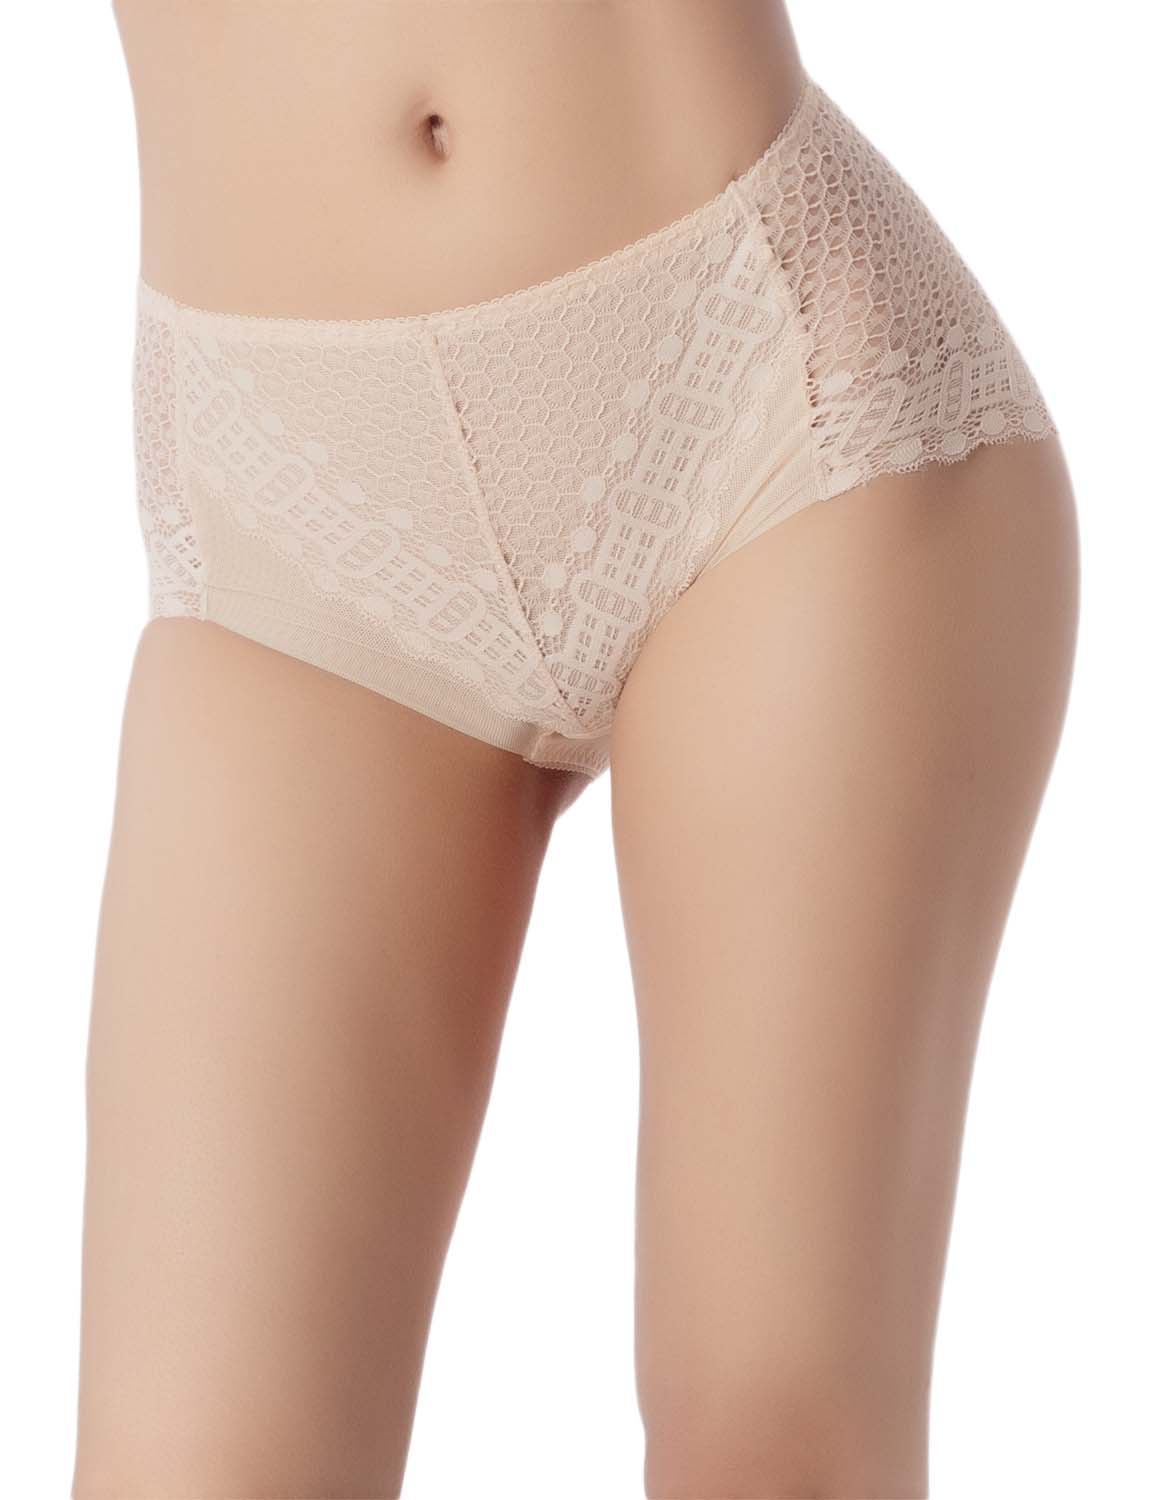 Women's See-through Ladies Briefs Hipster Panties Eyelet Lace Knickers